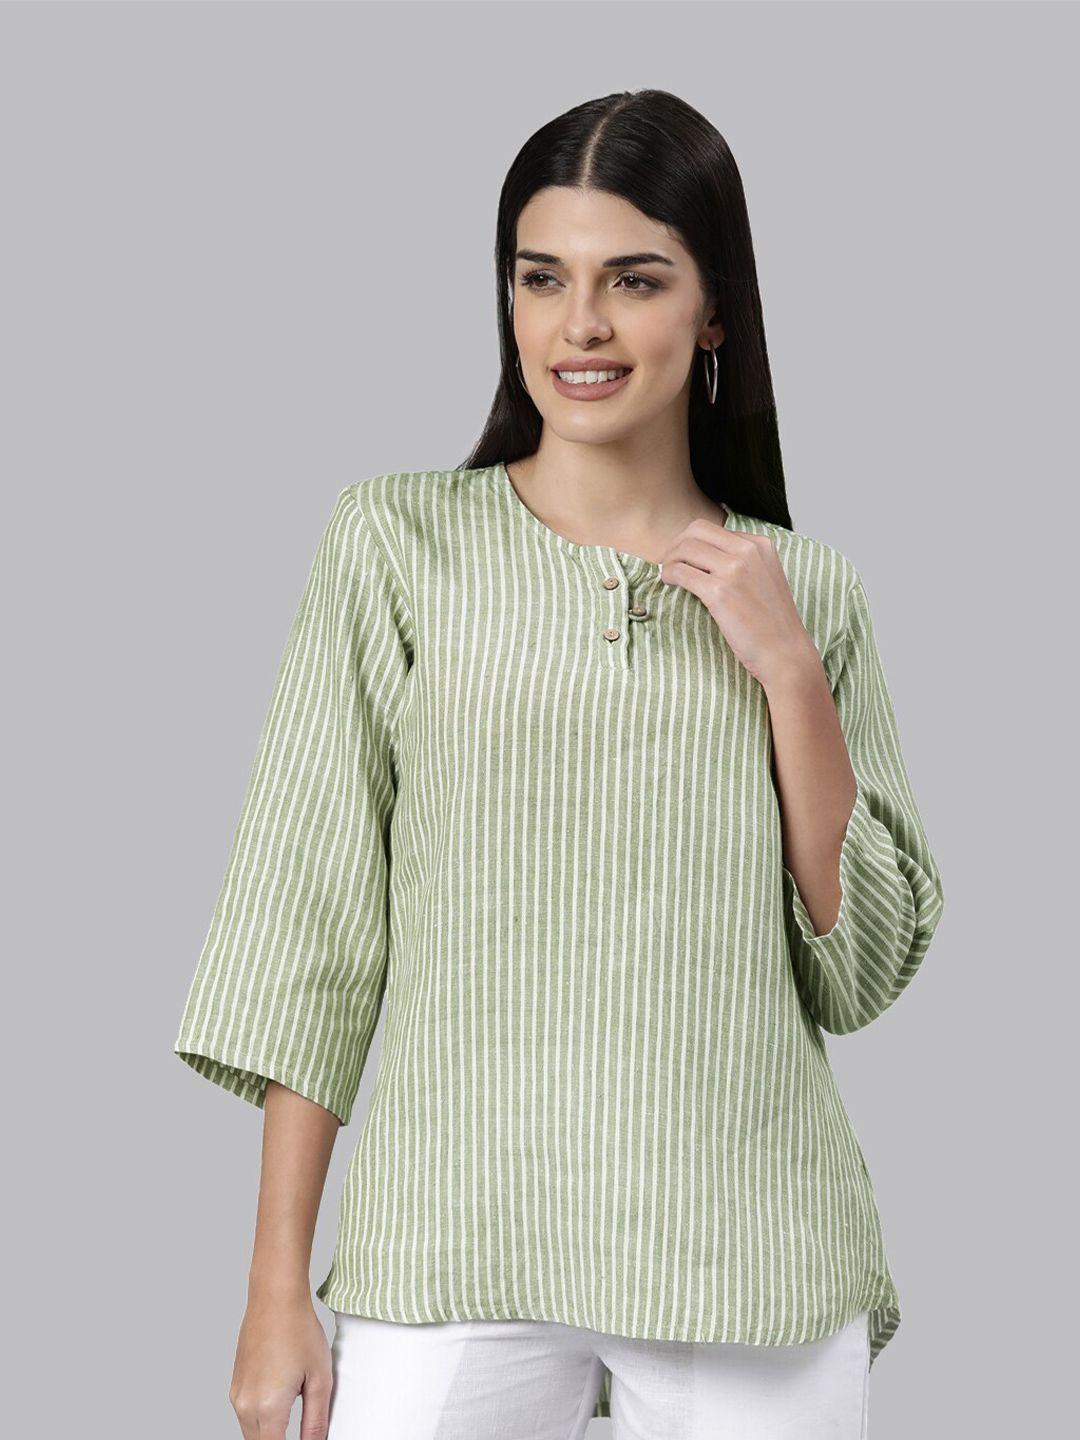 ecentric women olive green striped top